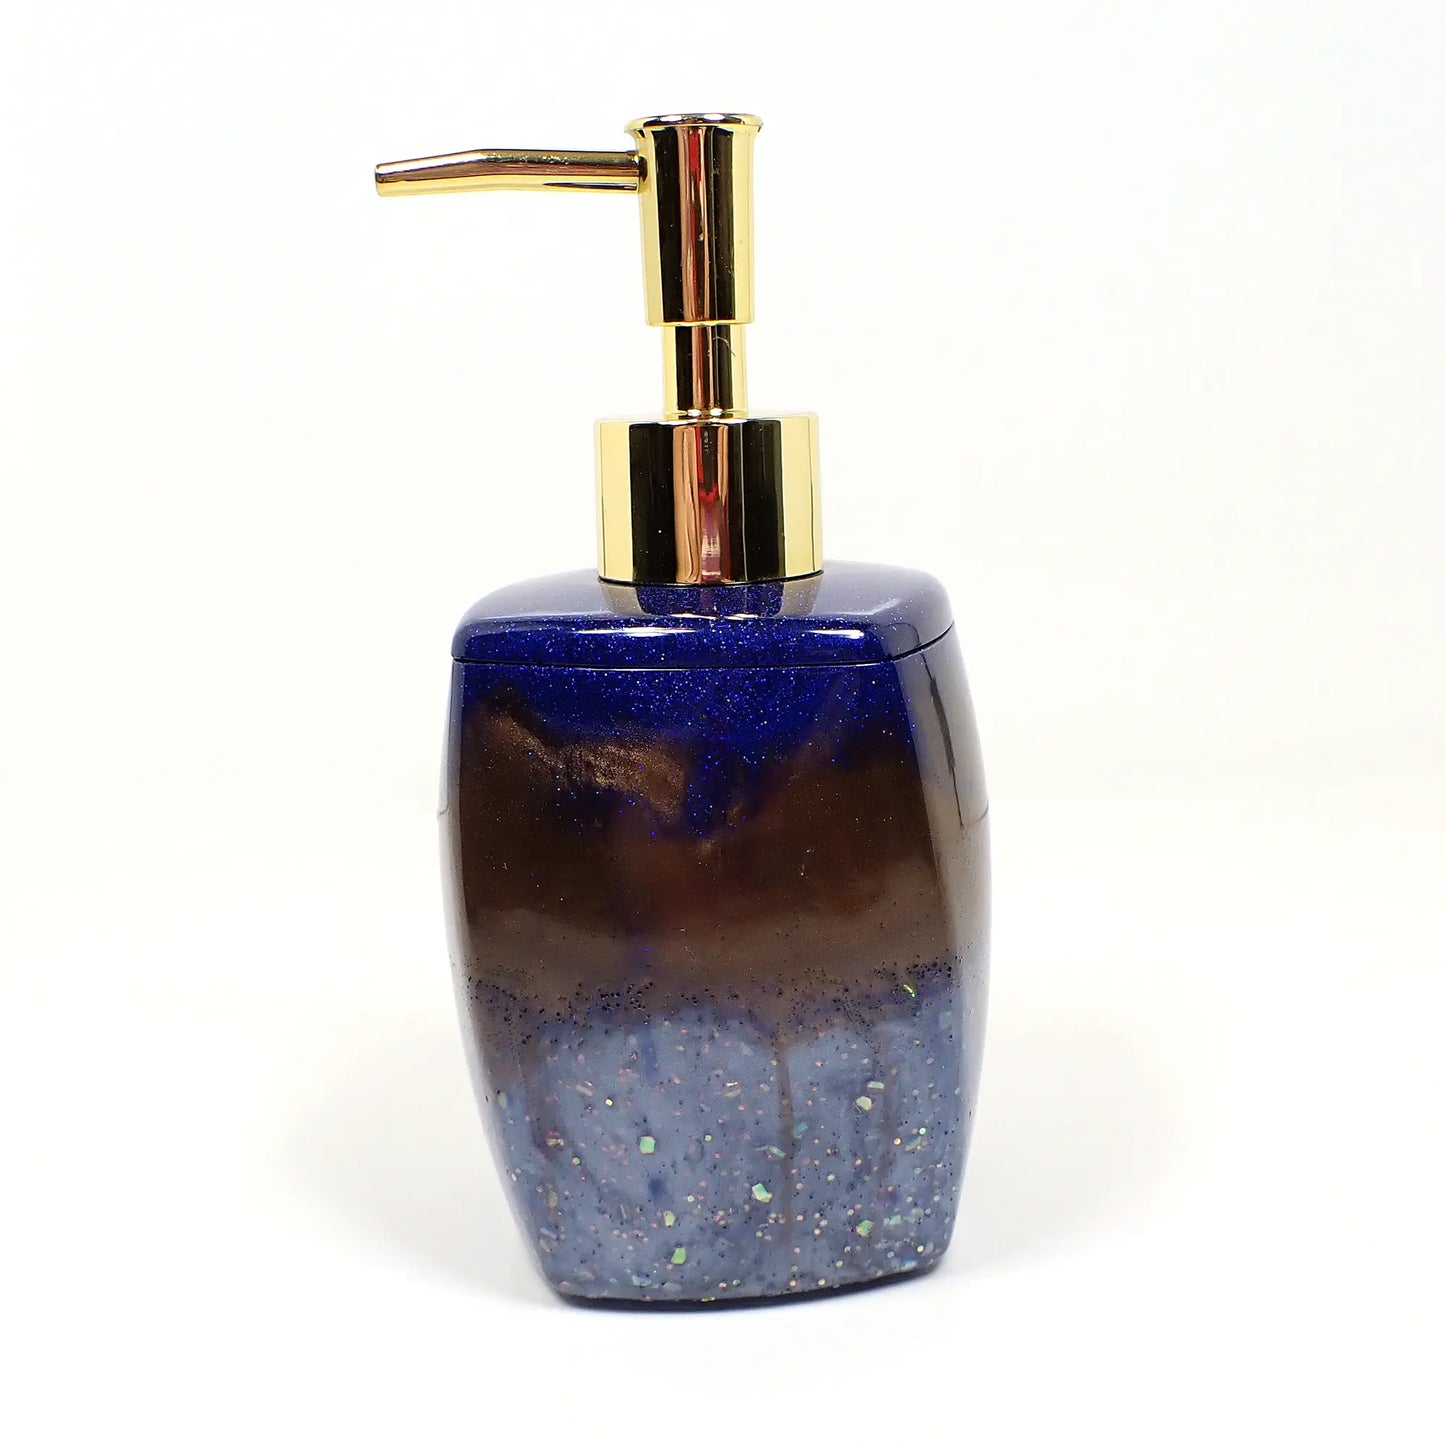 Angled Square Handmade Pearly Blue and Brown Resin Soap Dispenser with Glitter